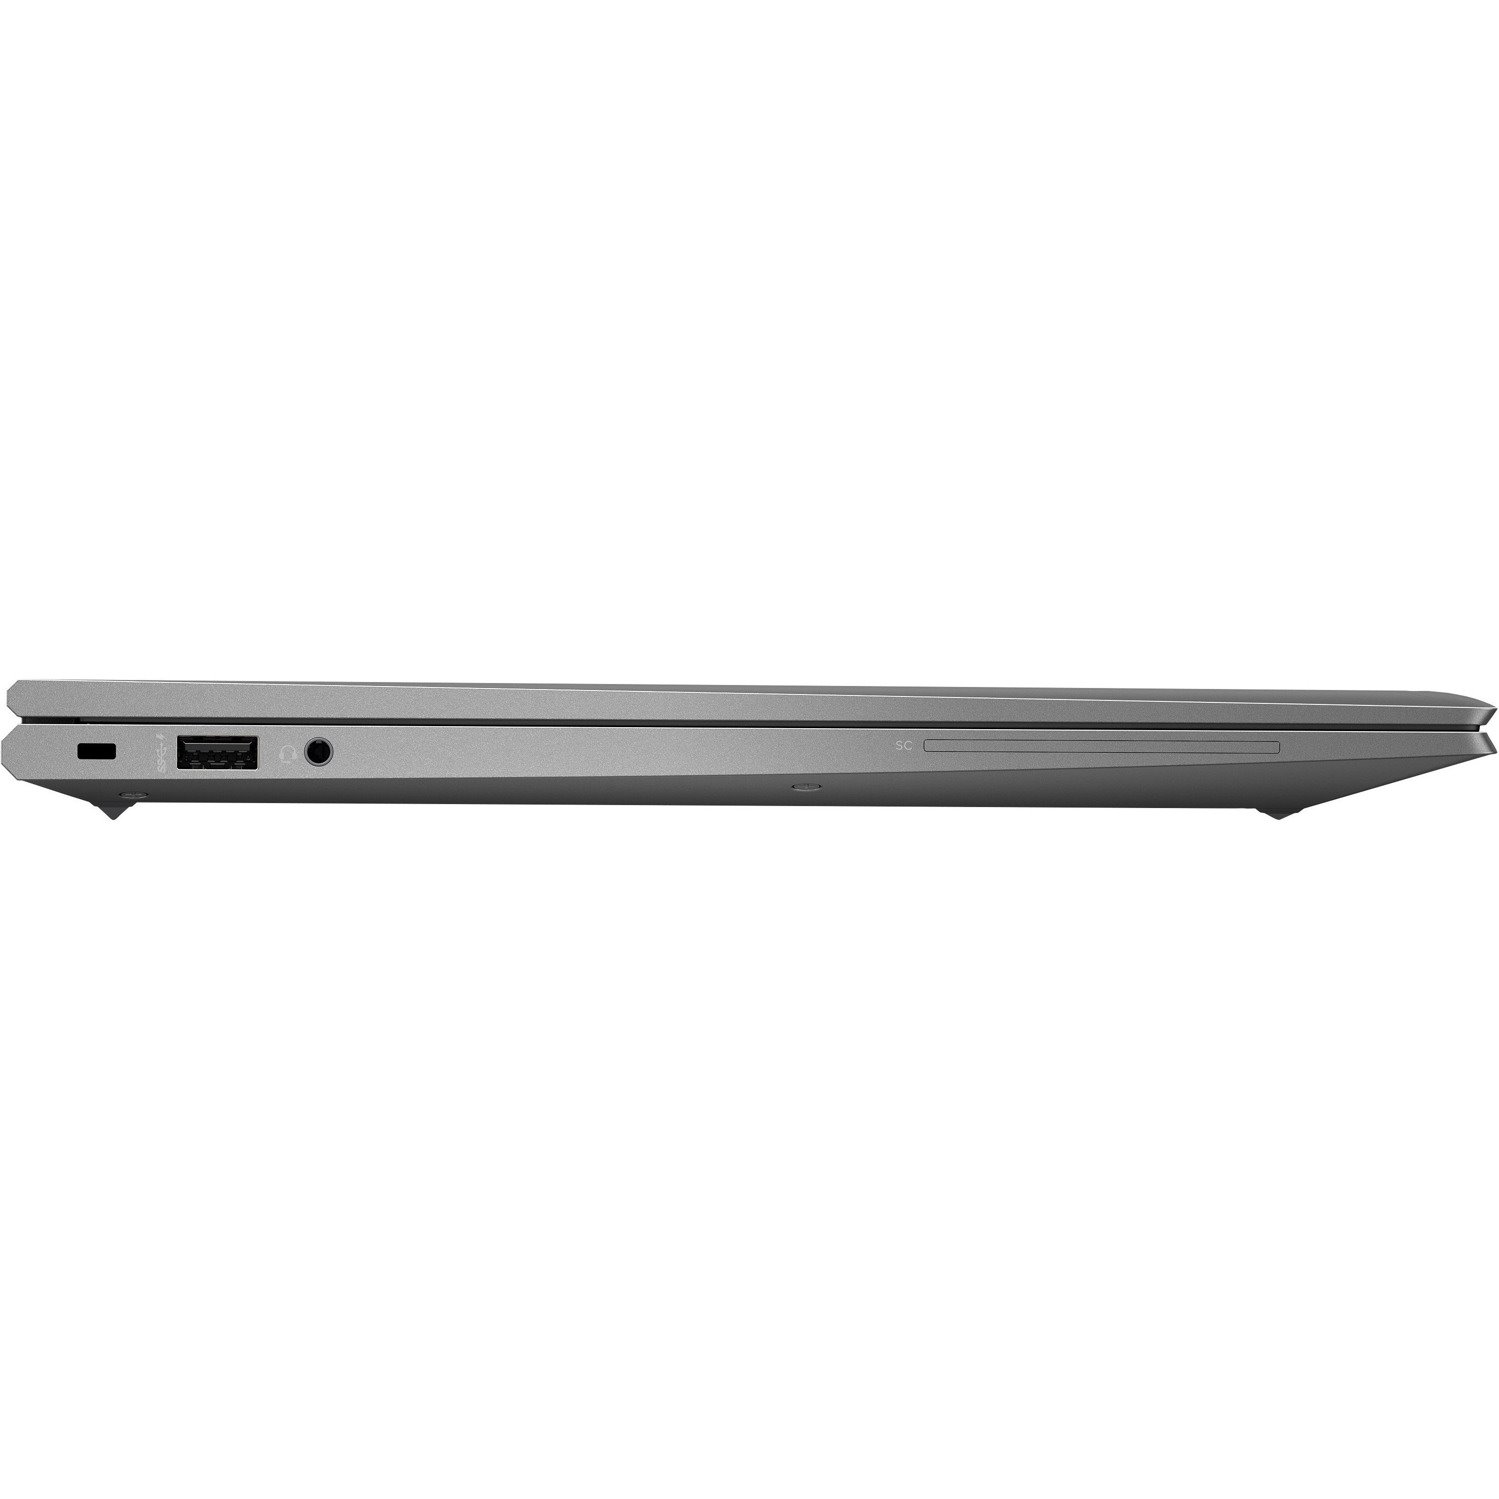 HP ZBook Firefly 14 G8 14" Rugged Mobile Workstation - Full HD - 1920 x 1080 - Intel Core i7 11th Gen i7-1165G7 Quad-core (4 Core) 2.80 GHz - 16 GB Total RAM - 256 GB SSD